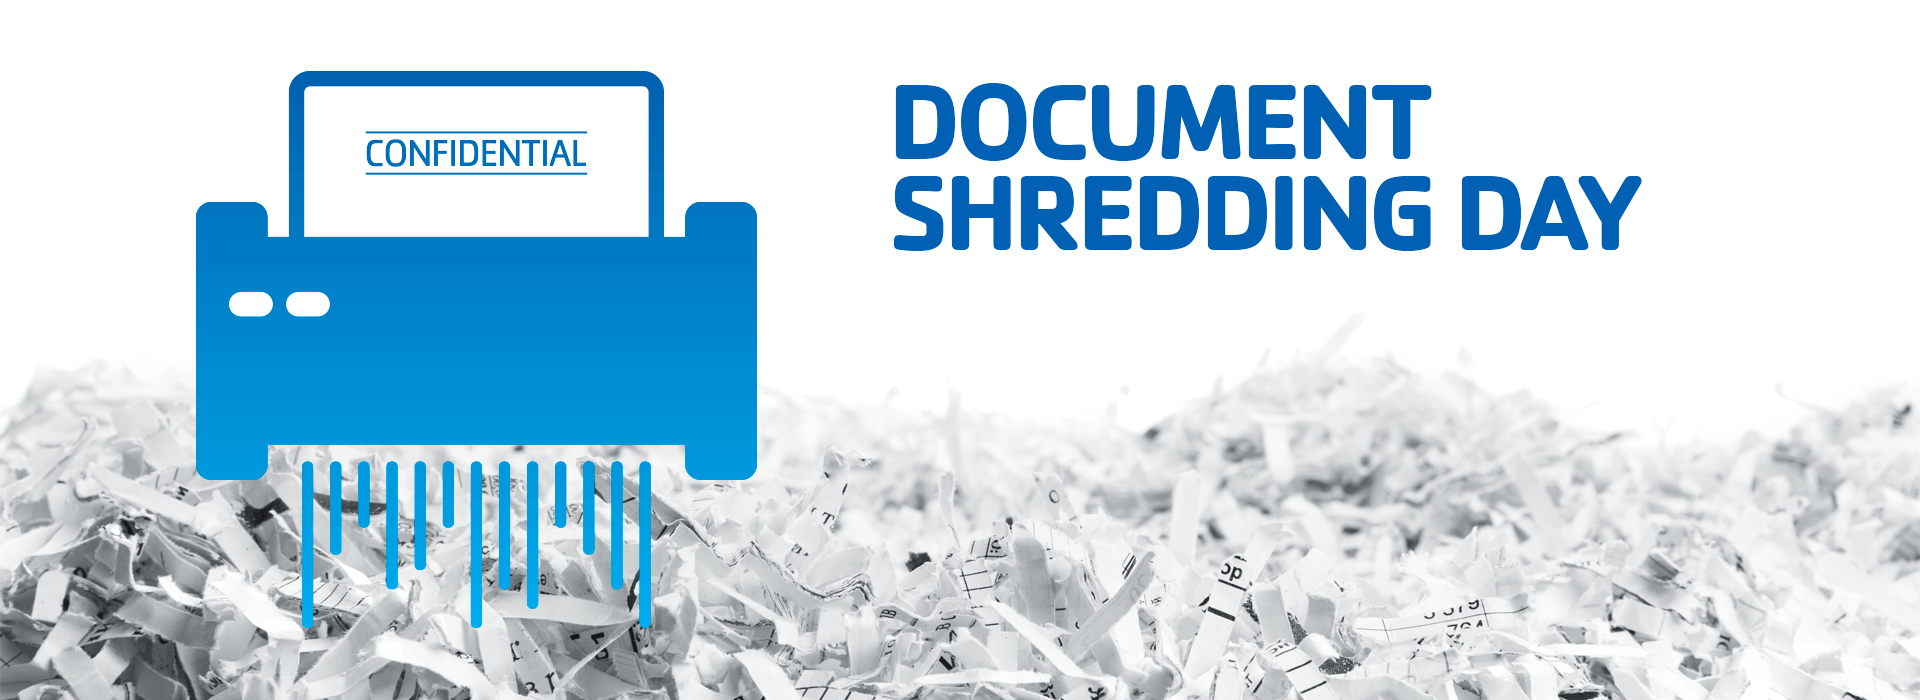 Image of a shredder with the text document shredding day